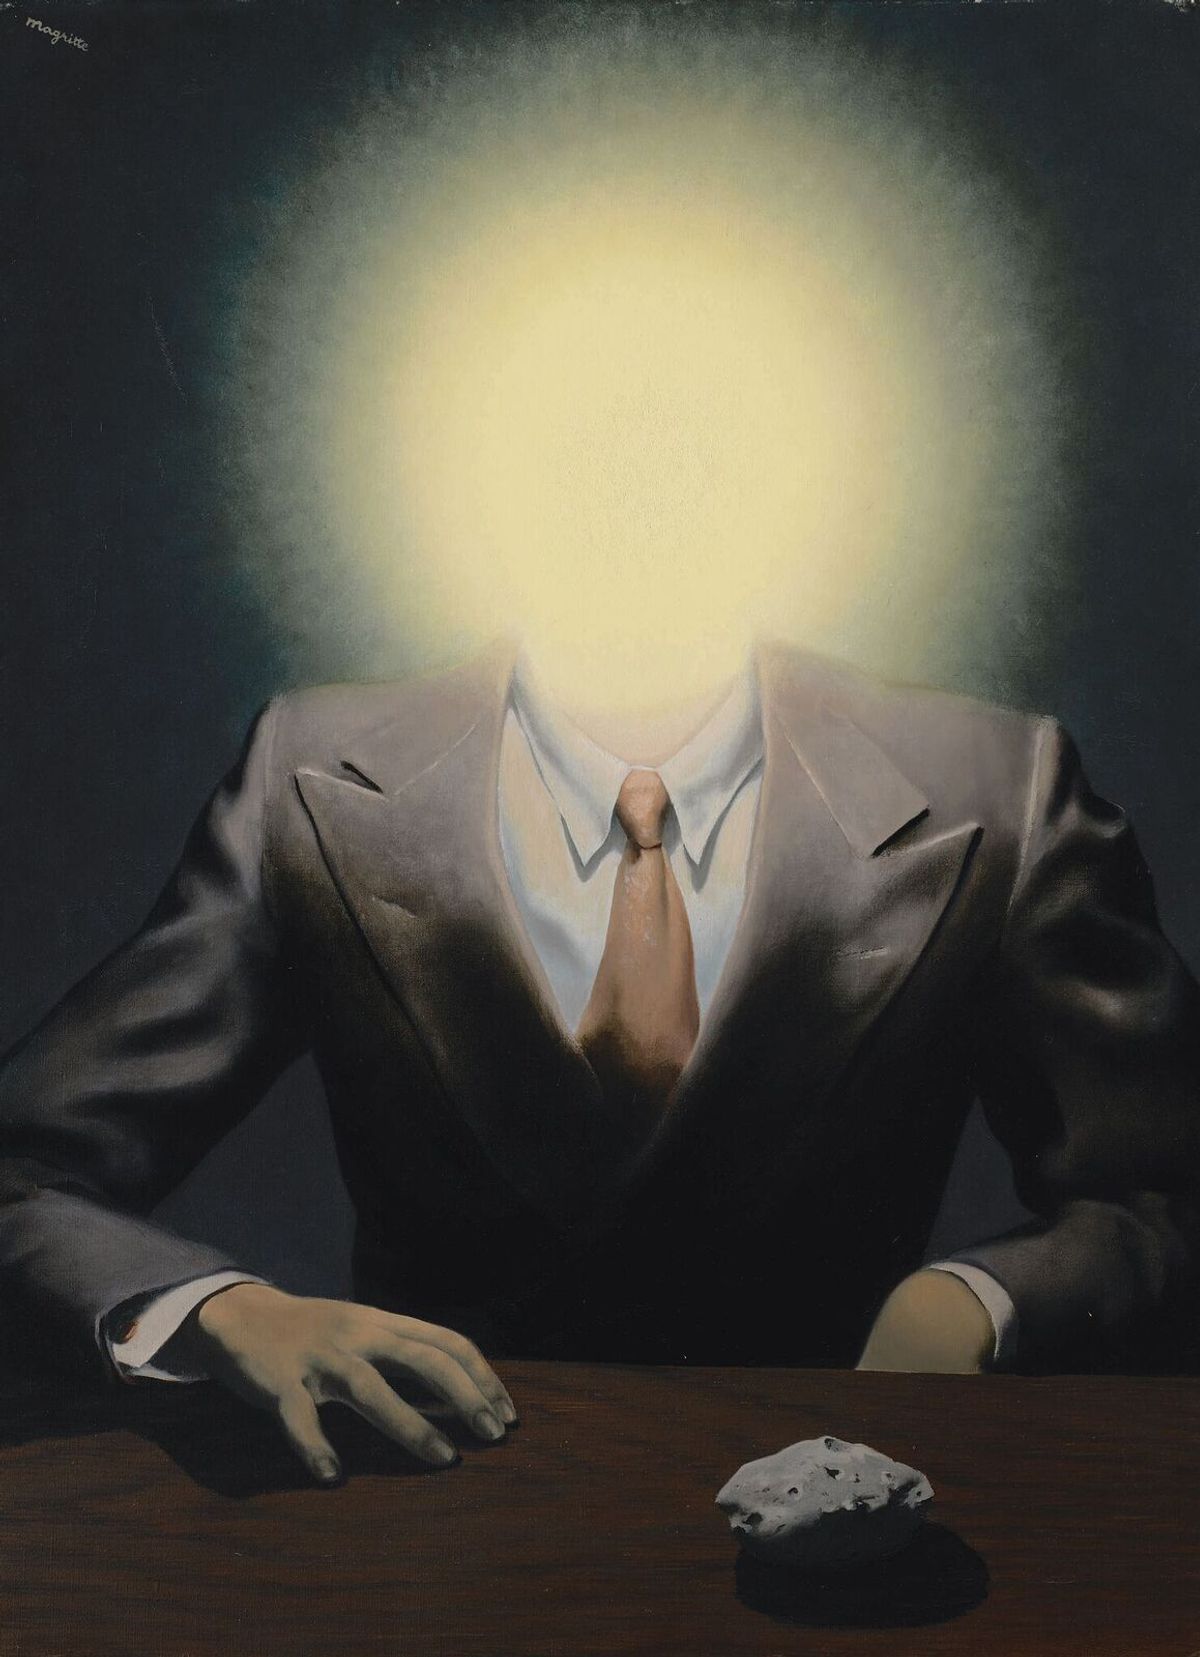 René Magritte's Le principe du plaisir (1937) brought in $23.5m ($26.8m with fees), well over its high estimate of $20m Sotheby's